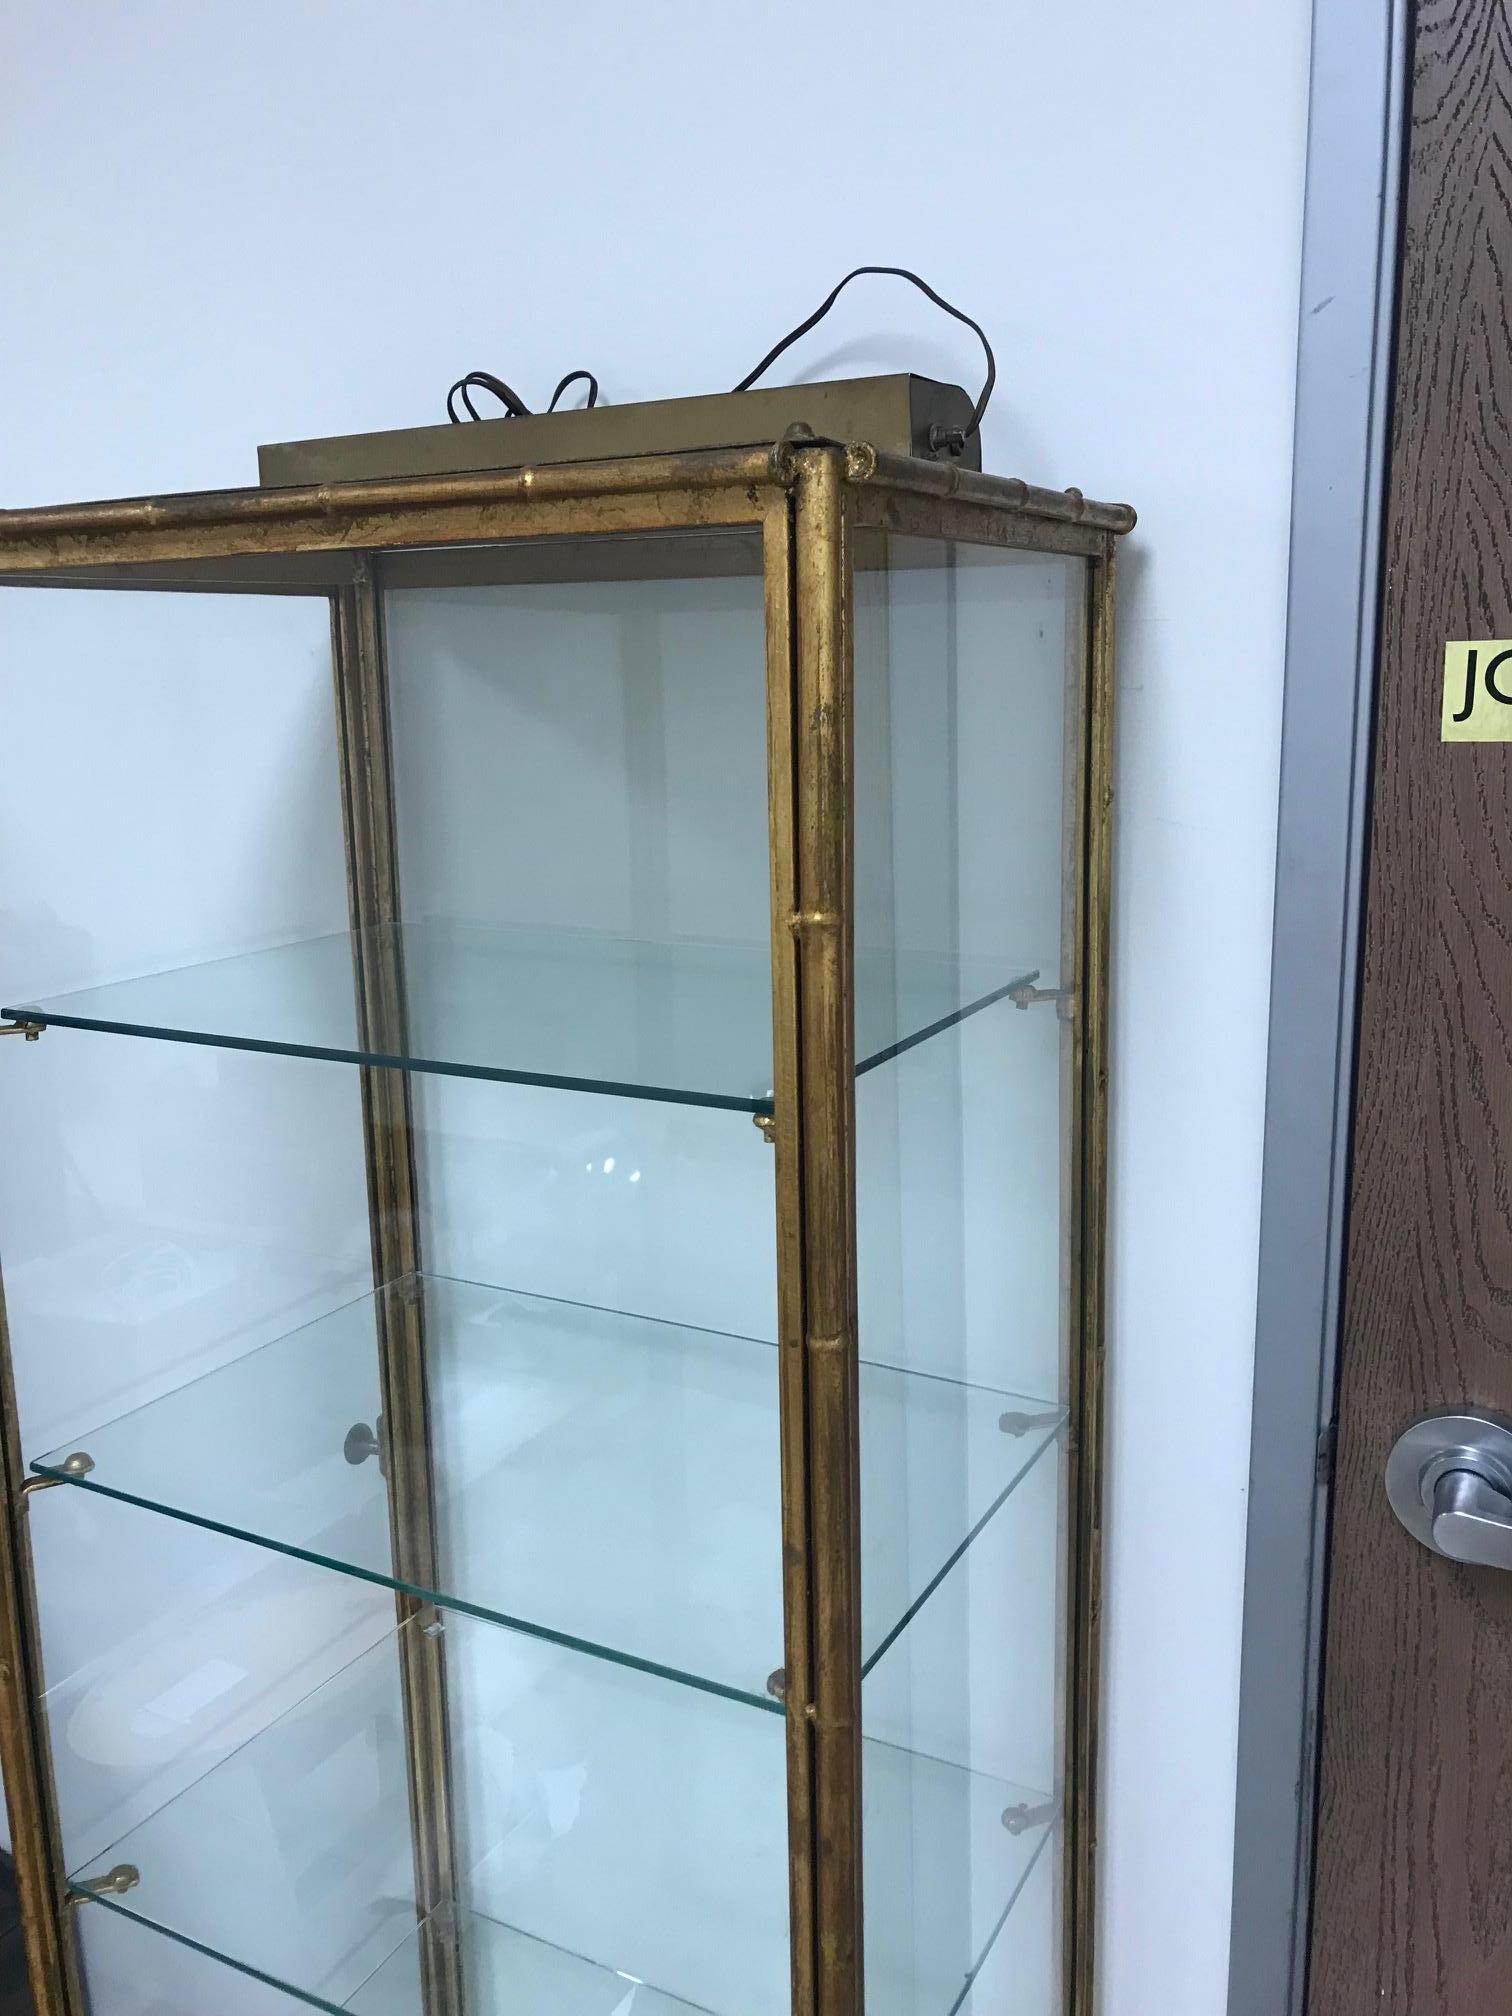 Painted gold on metal four glasses shelves Italian display case with top light.
Door open left side.